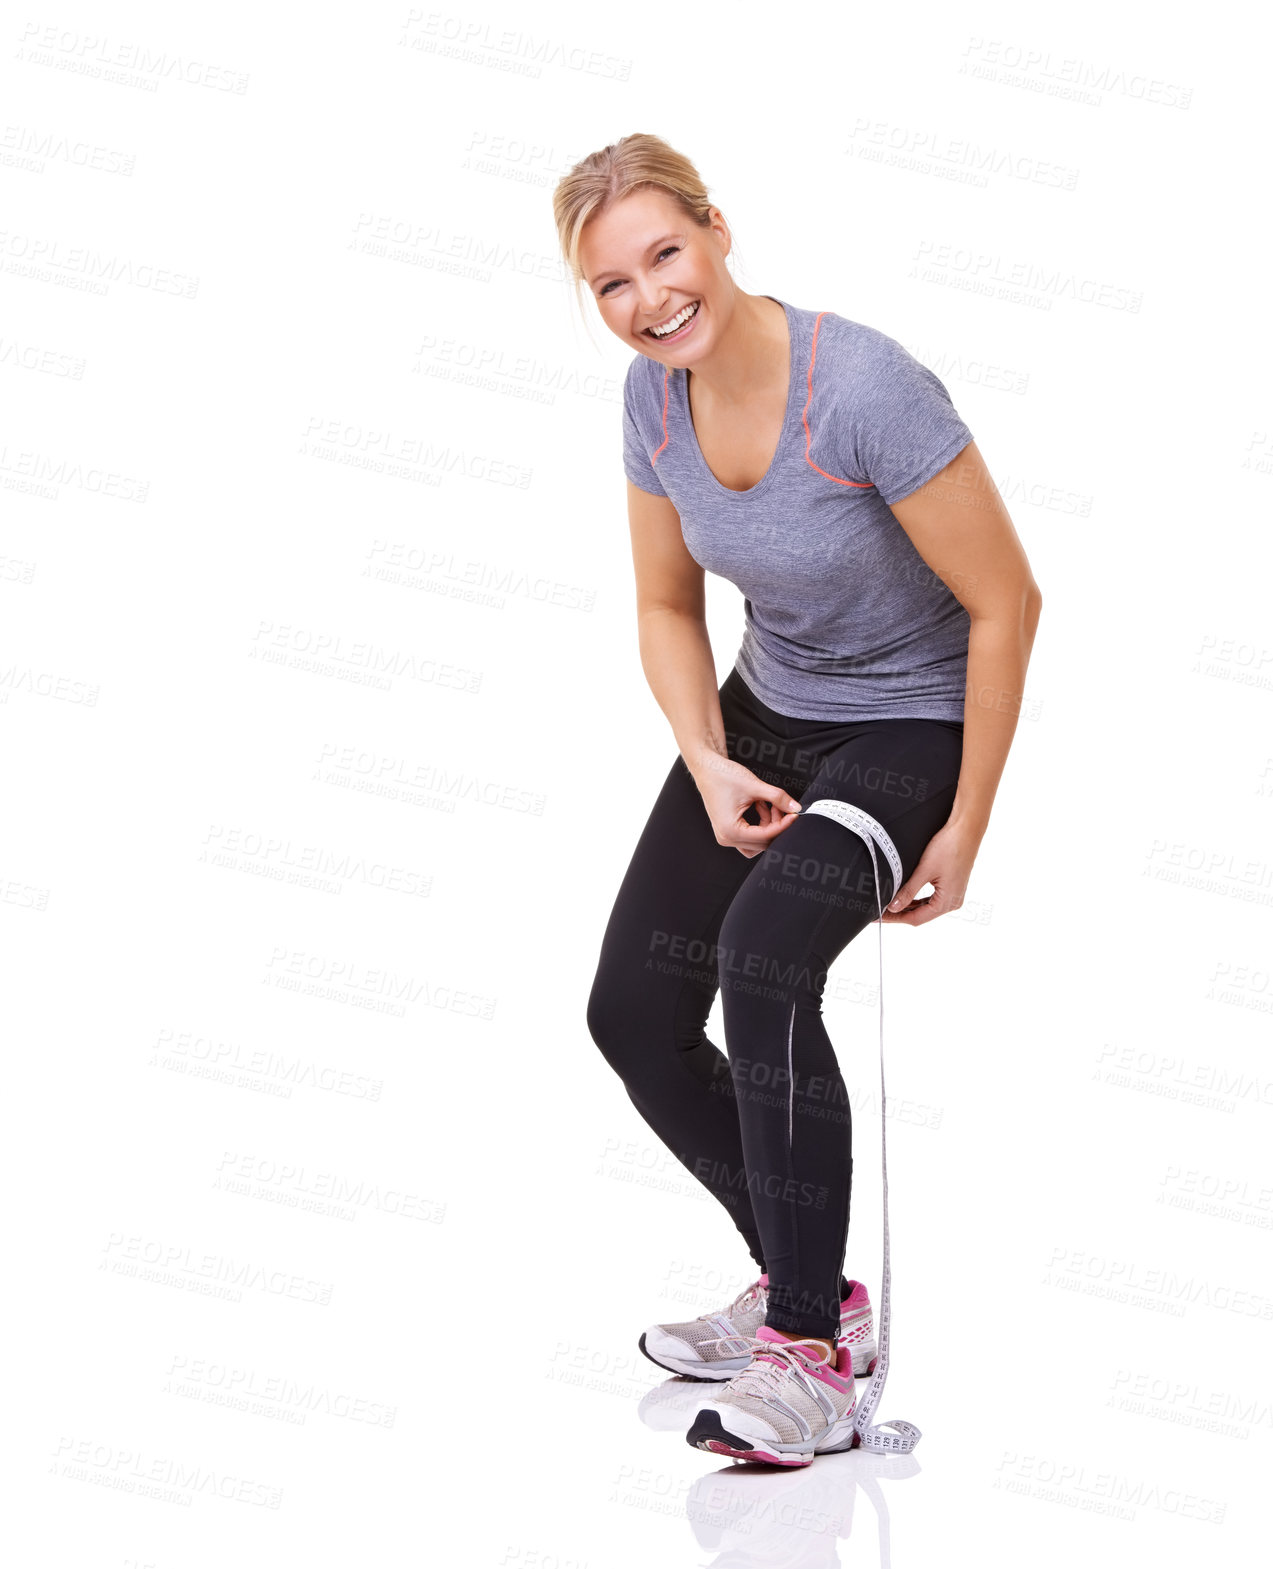 Buy stock photo Studio shot of an attractive young woman measuring her workout progress with a tape measure